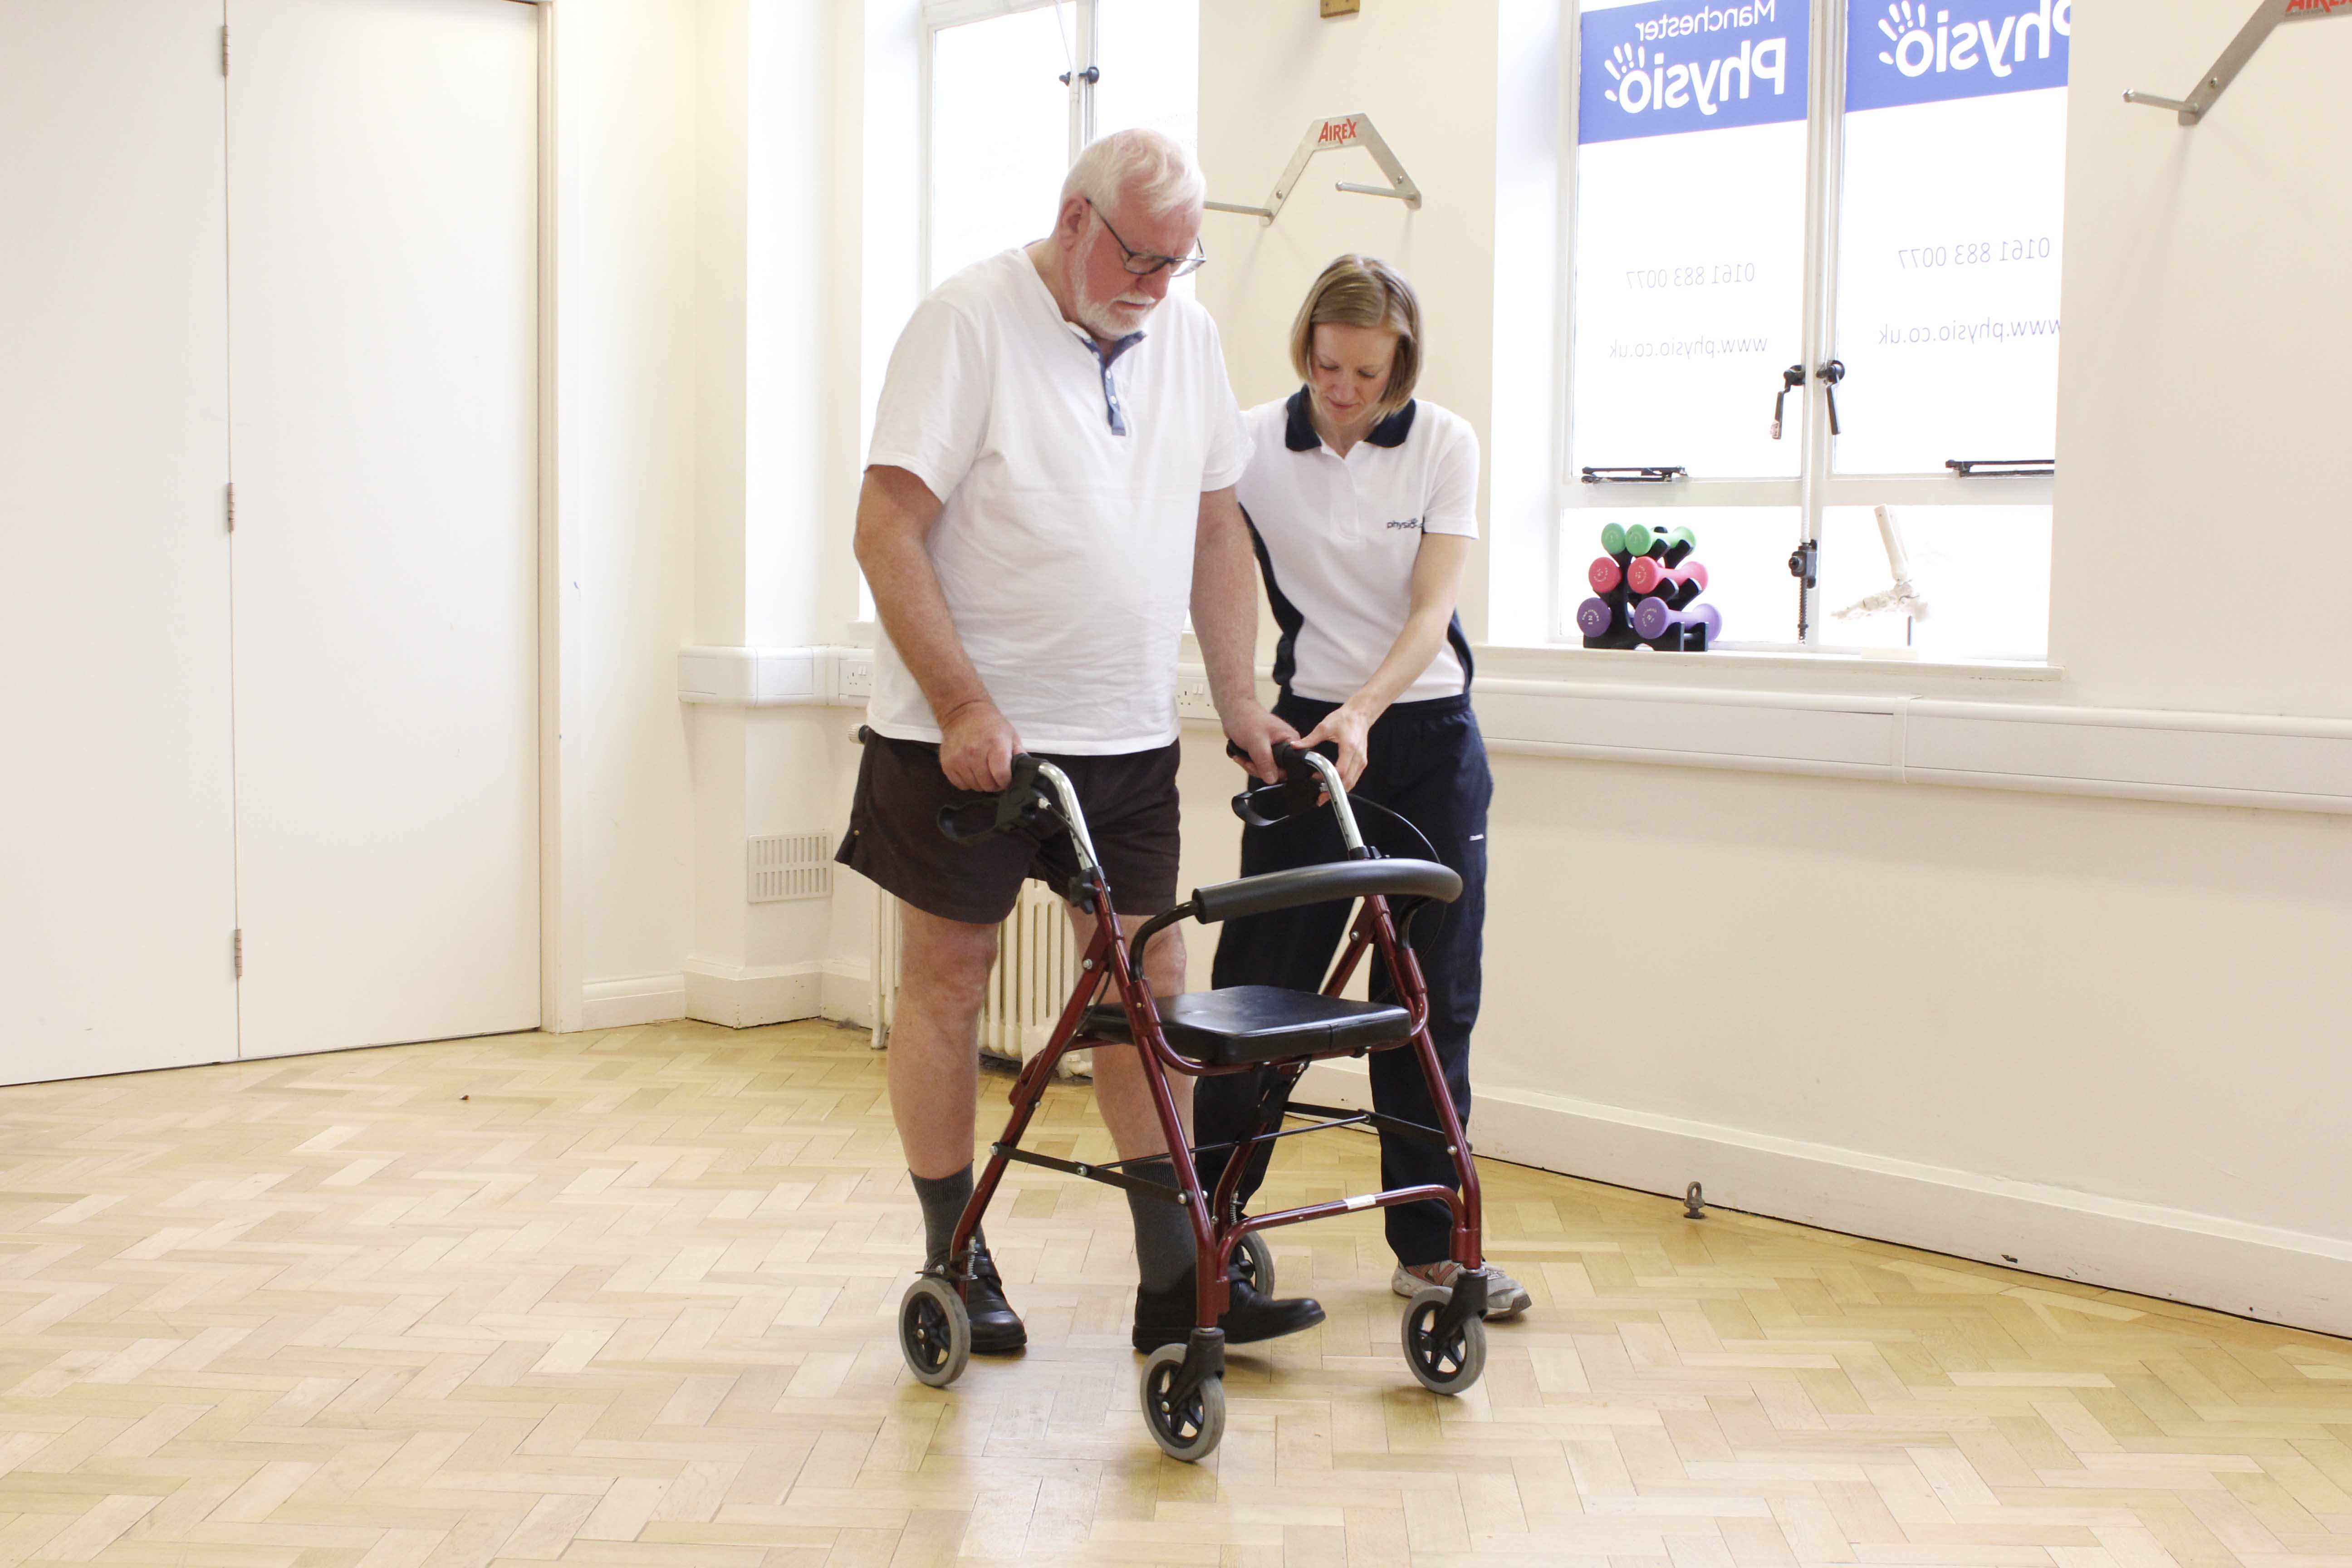 Specialist physiotherapist closely supervising mobility exercises using a rollator frame